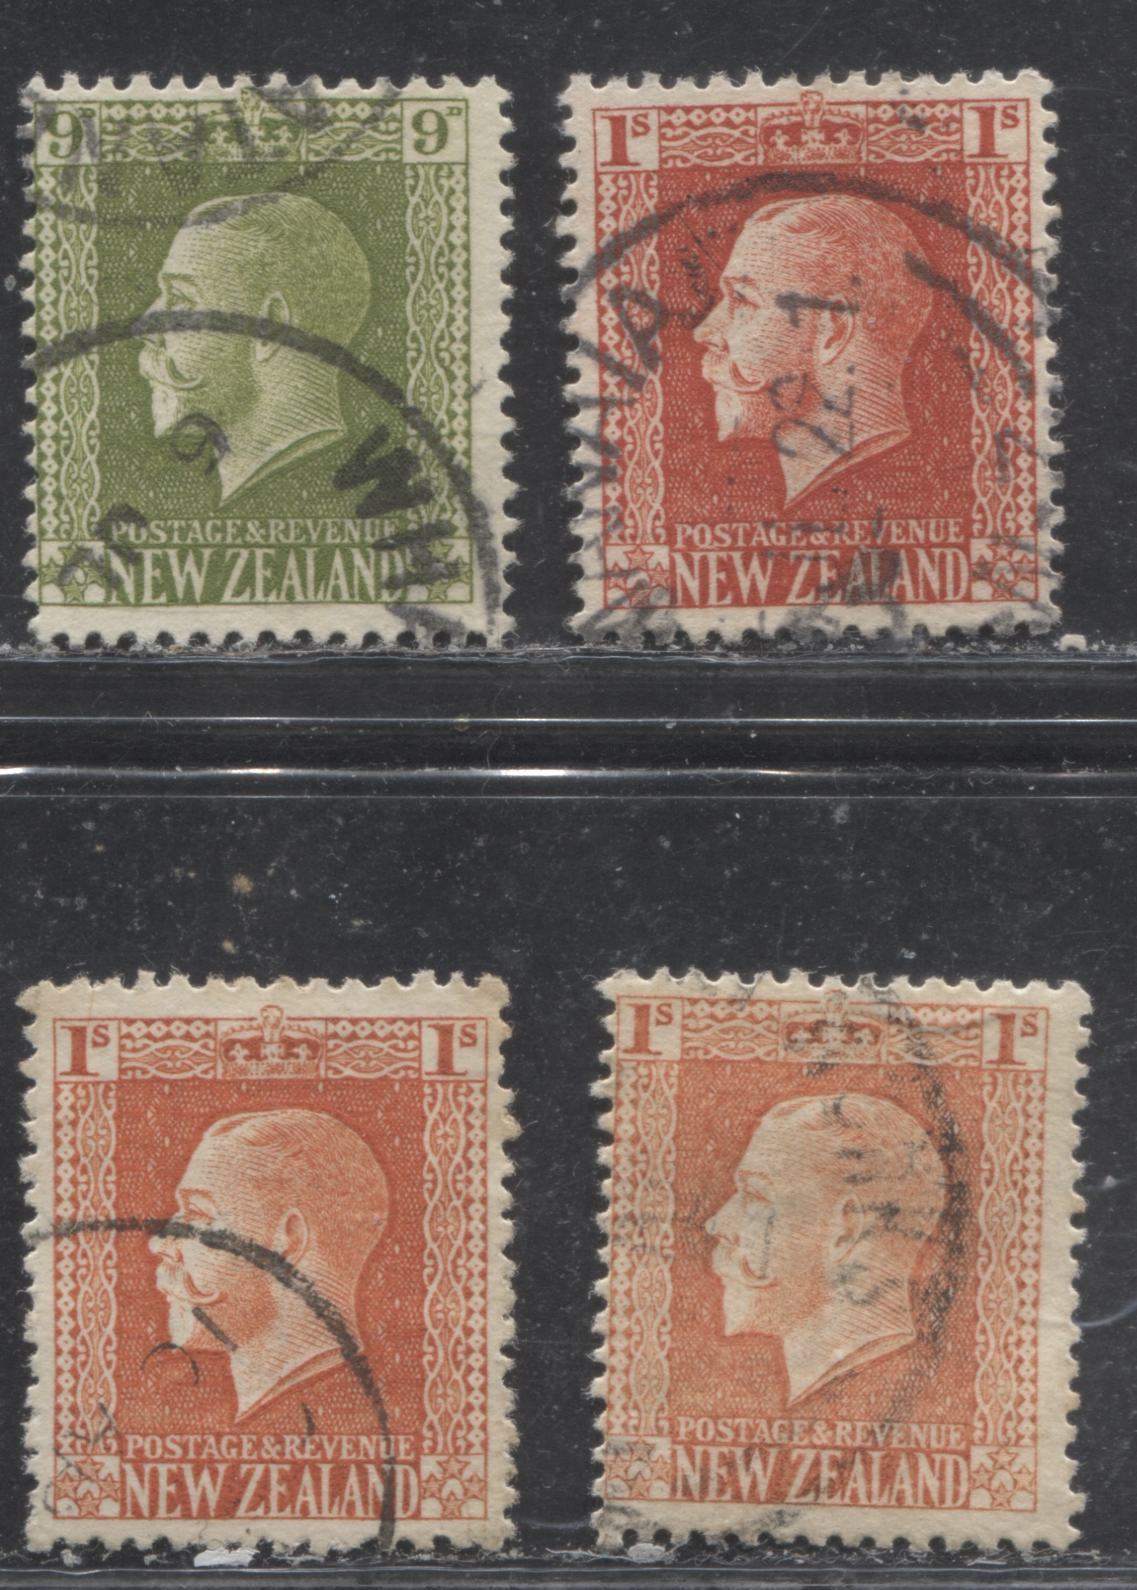 Lot 179 New Zealand SG#429e/430ca 9d - 1/- Sage Green - Vermilion King George V, 1915-1930 Perkins Bacon Engraved Portrait Issue, 3 Fine and VF Used Singles, Single Watermark, Cowan Paper, Perf. 14 x 14.5, Including Both Listed Shades of the 1/-